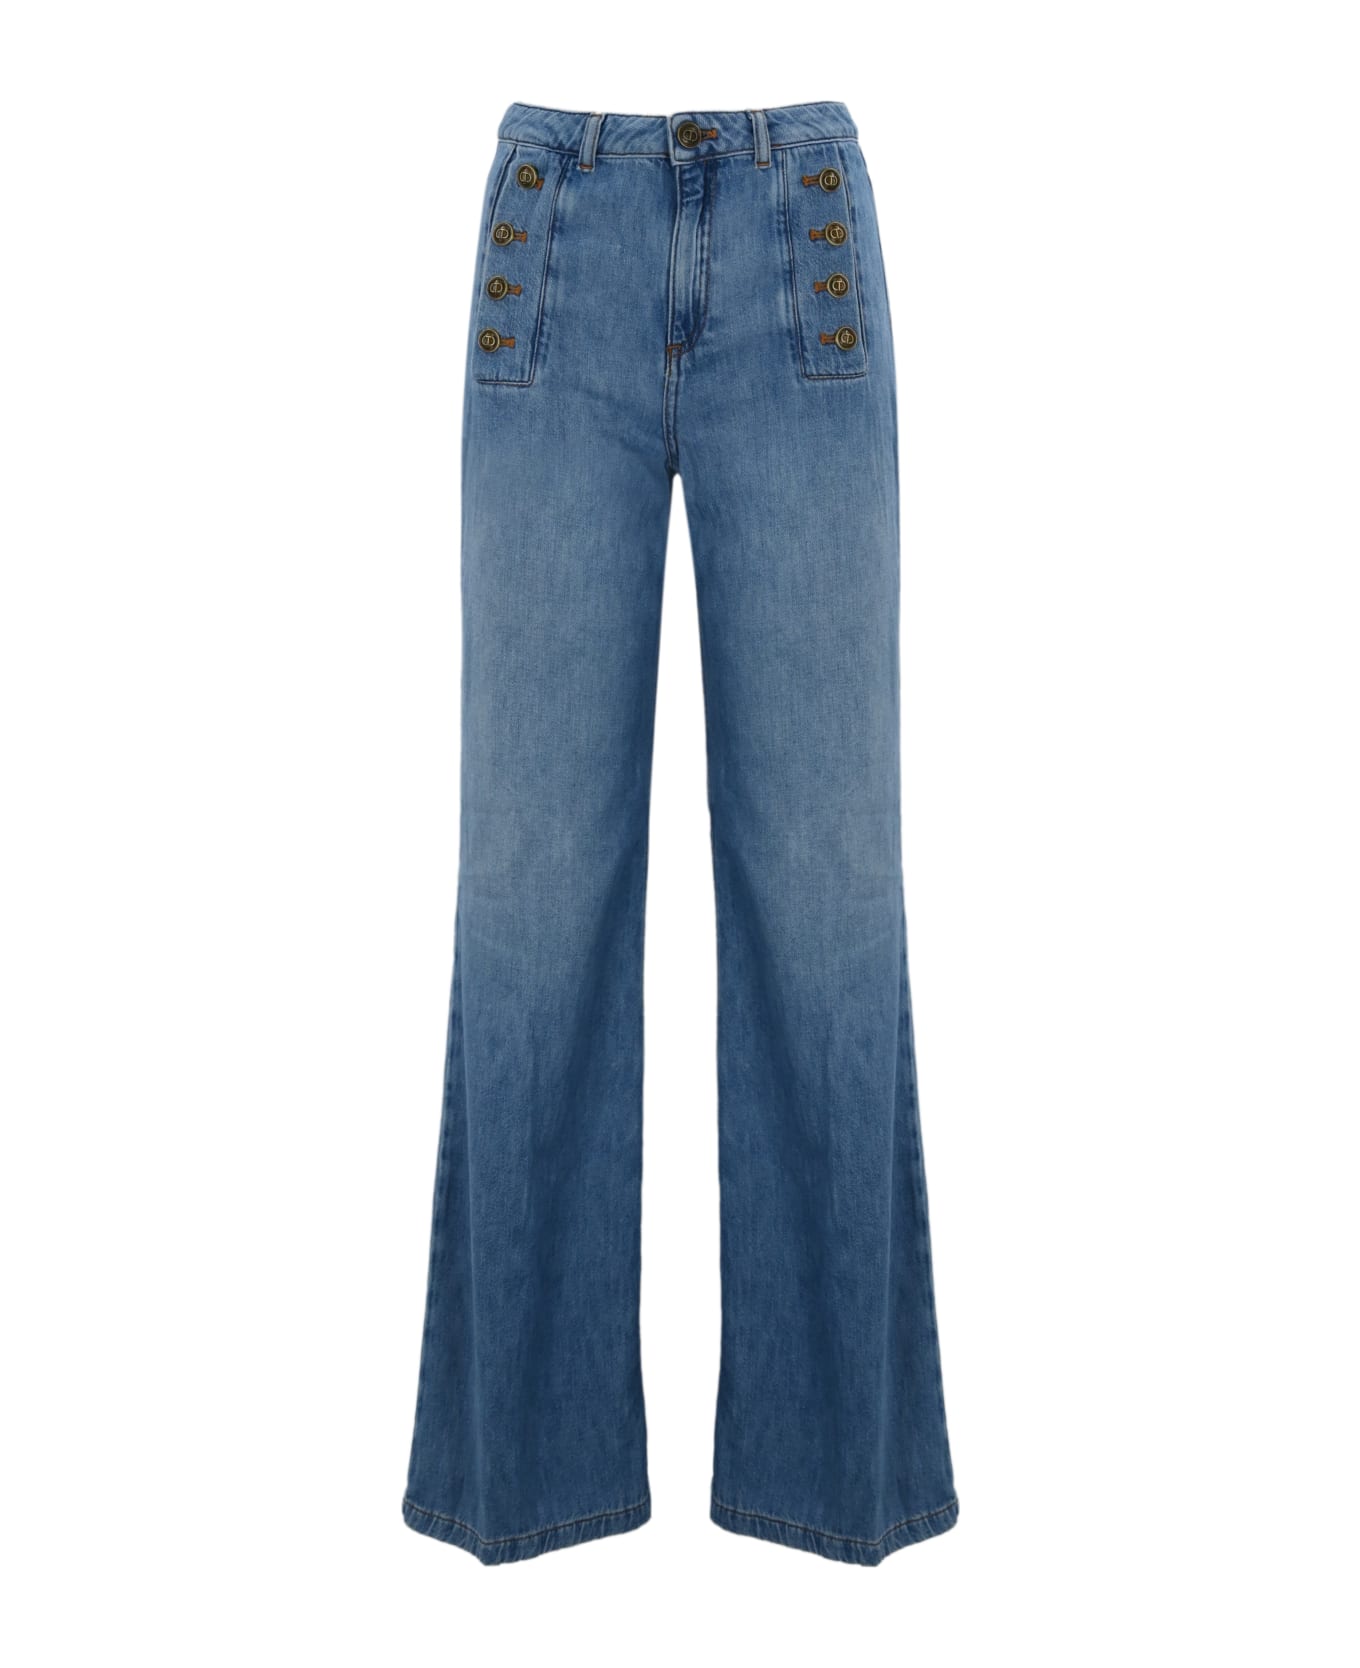 TwinSet Flared Jeans With Buttons - Stone Washed